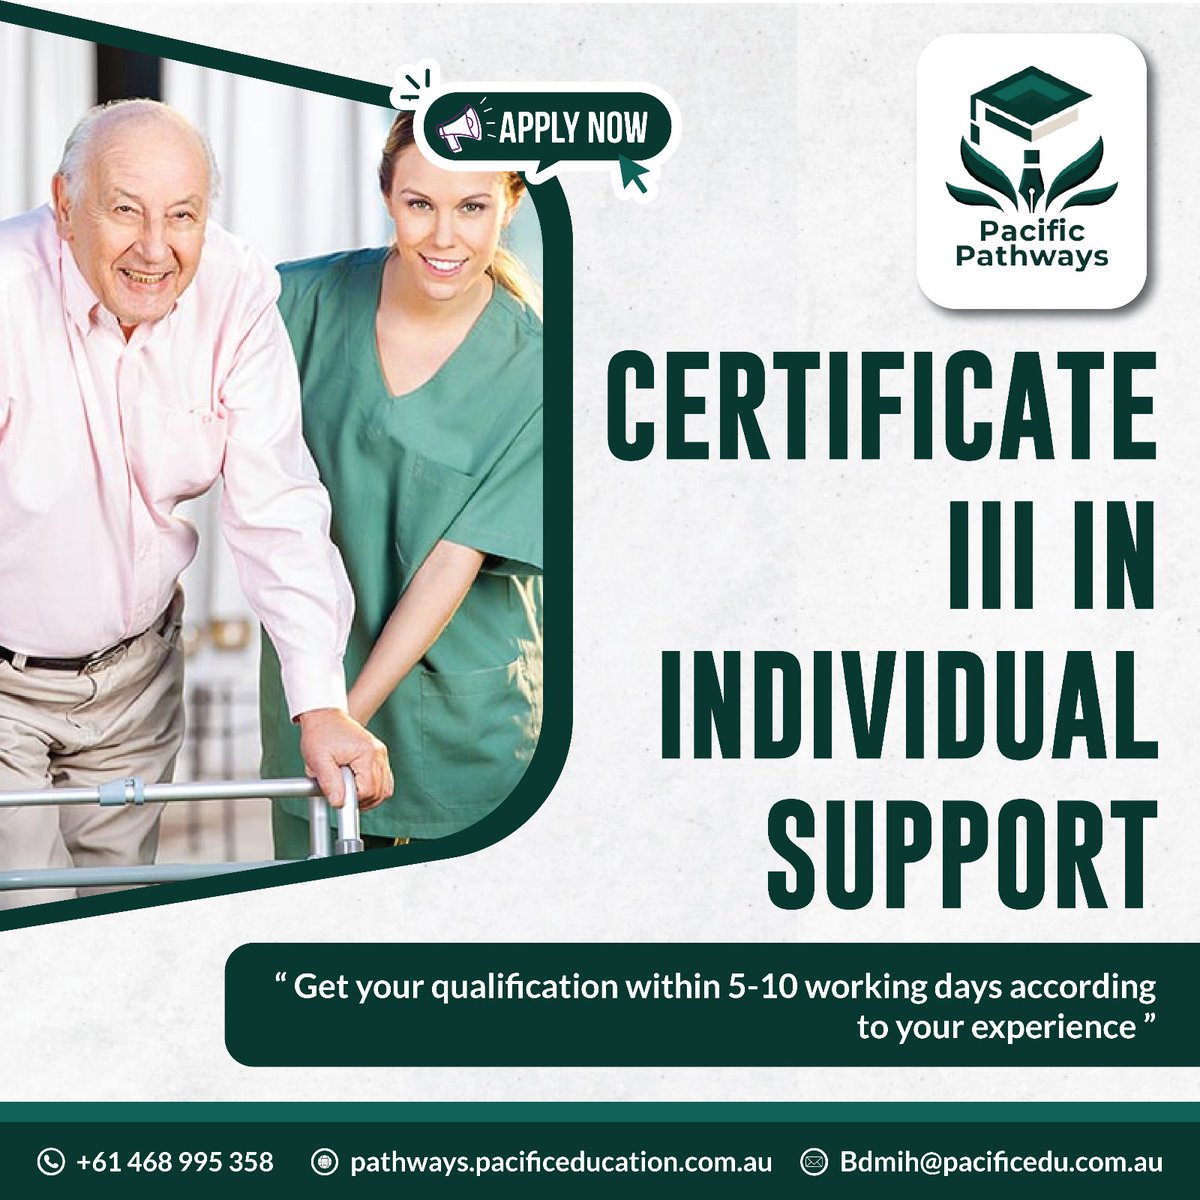 Unlock your potential with RPL! launch Get your skills recognized with our Certificate III in Individual Support. Transform your experience into a qualification today!Contact Us:
Call: 468 995 358   #Mother'sDay #aflpieseagles #RPL #SkillsRecognition #individualsupport #australia